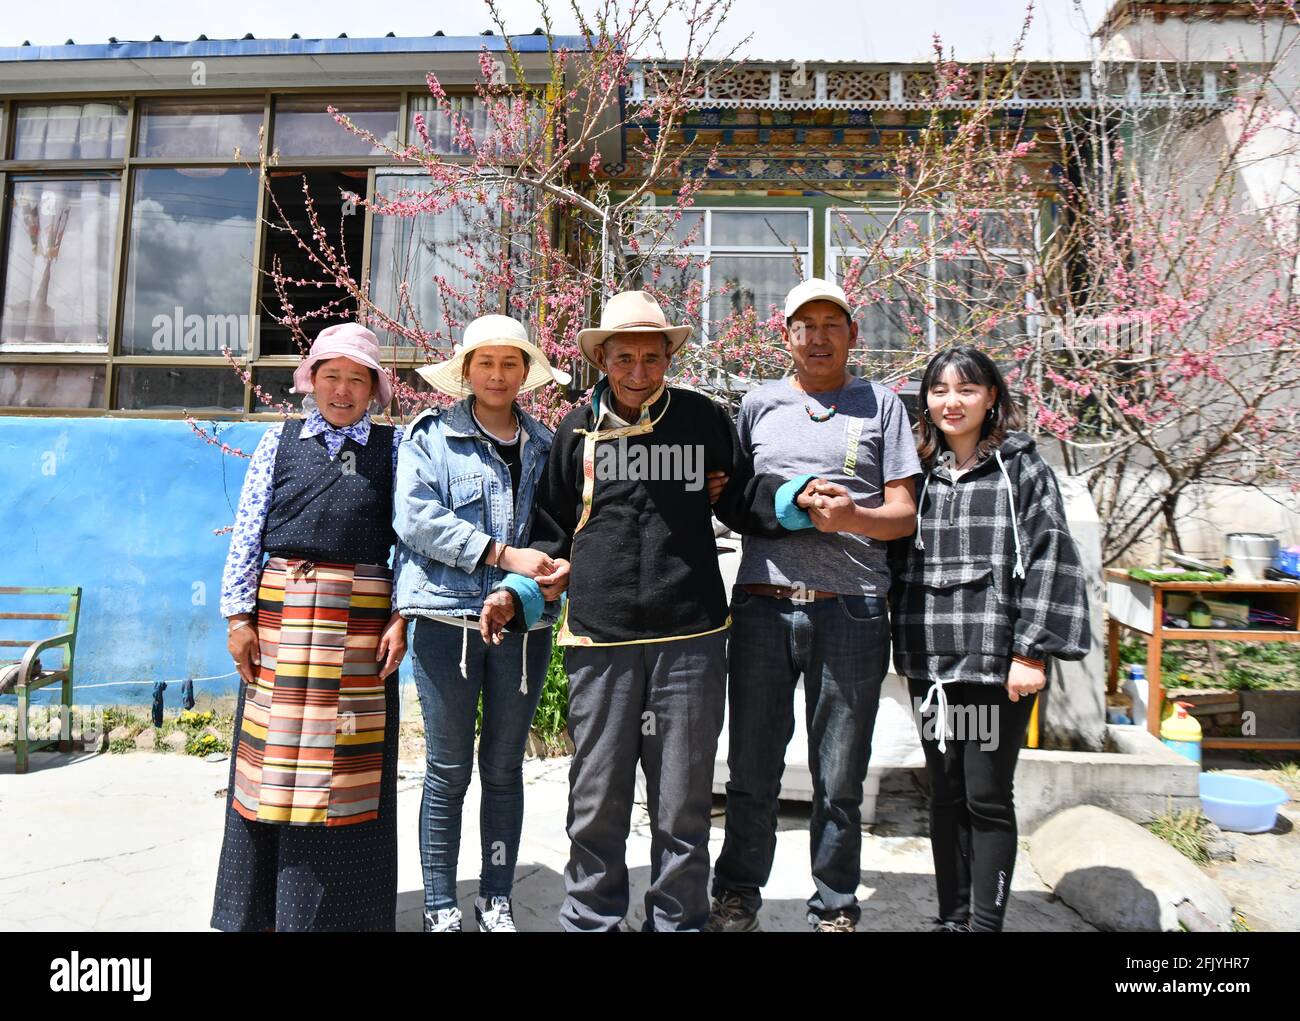 (210427) -- LHASA, April 27, 2021 (Xinhua) -- Lhapu (C) poses for a group photo with his family members in Lin'a Village of Dagze County in Lhasa, southwest China's Tibet Autonomous Region, April 25, 2021. Lhapu, born in 1938, worked as a serf before the democratic reform in Tibet in 1959, which abolished its feudal serfdom under theocracy. "As part of the production tools, we just did what the lord asked us to do, and were even forbidden to speak loudly," Lhapu recalled his life in the old times, adding that children had no guaranteed food and clothing. After the democratic reform, great cha Stock Photo